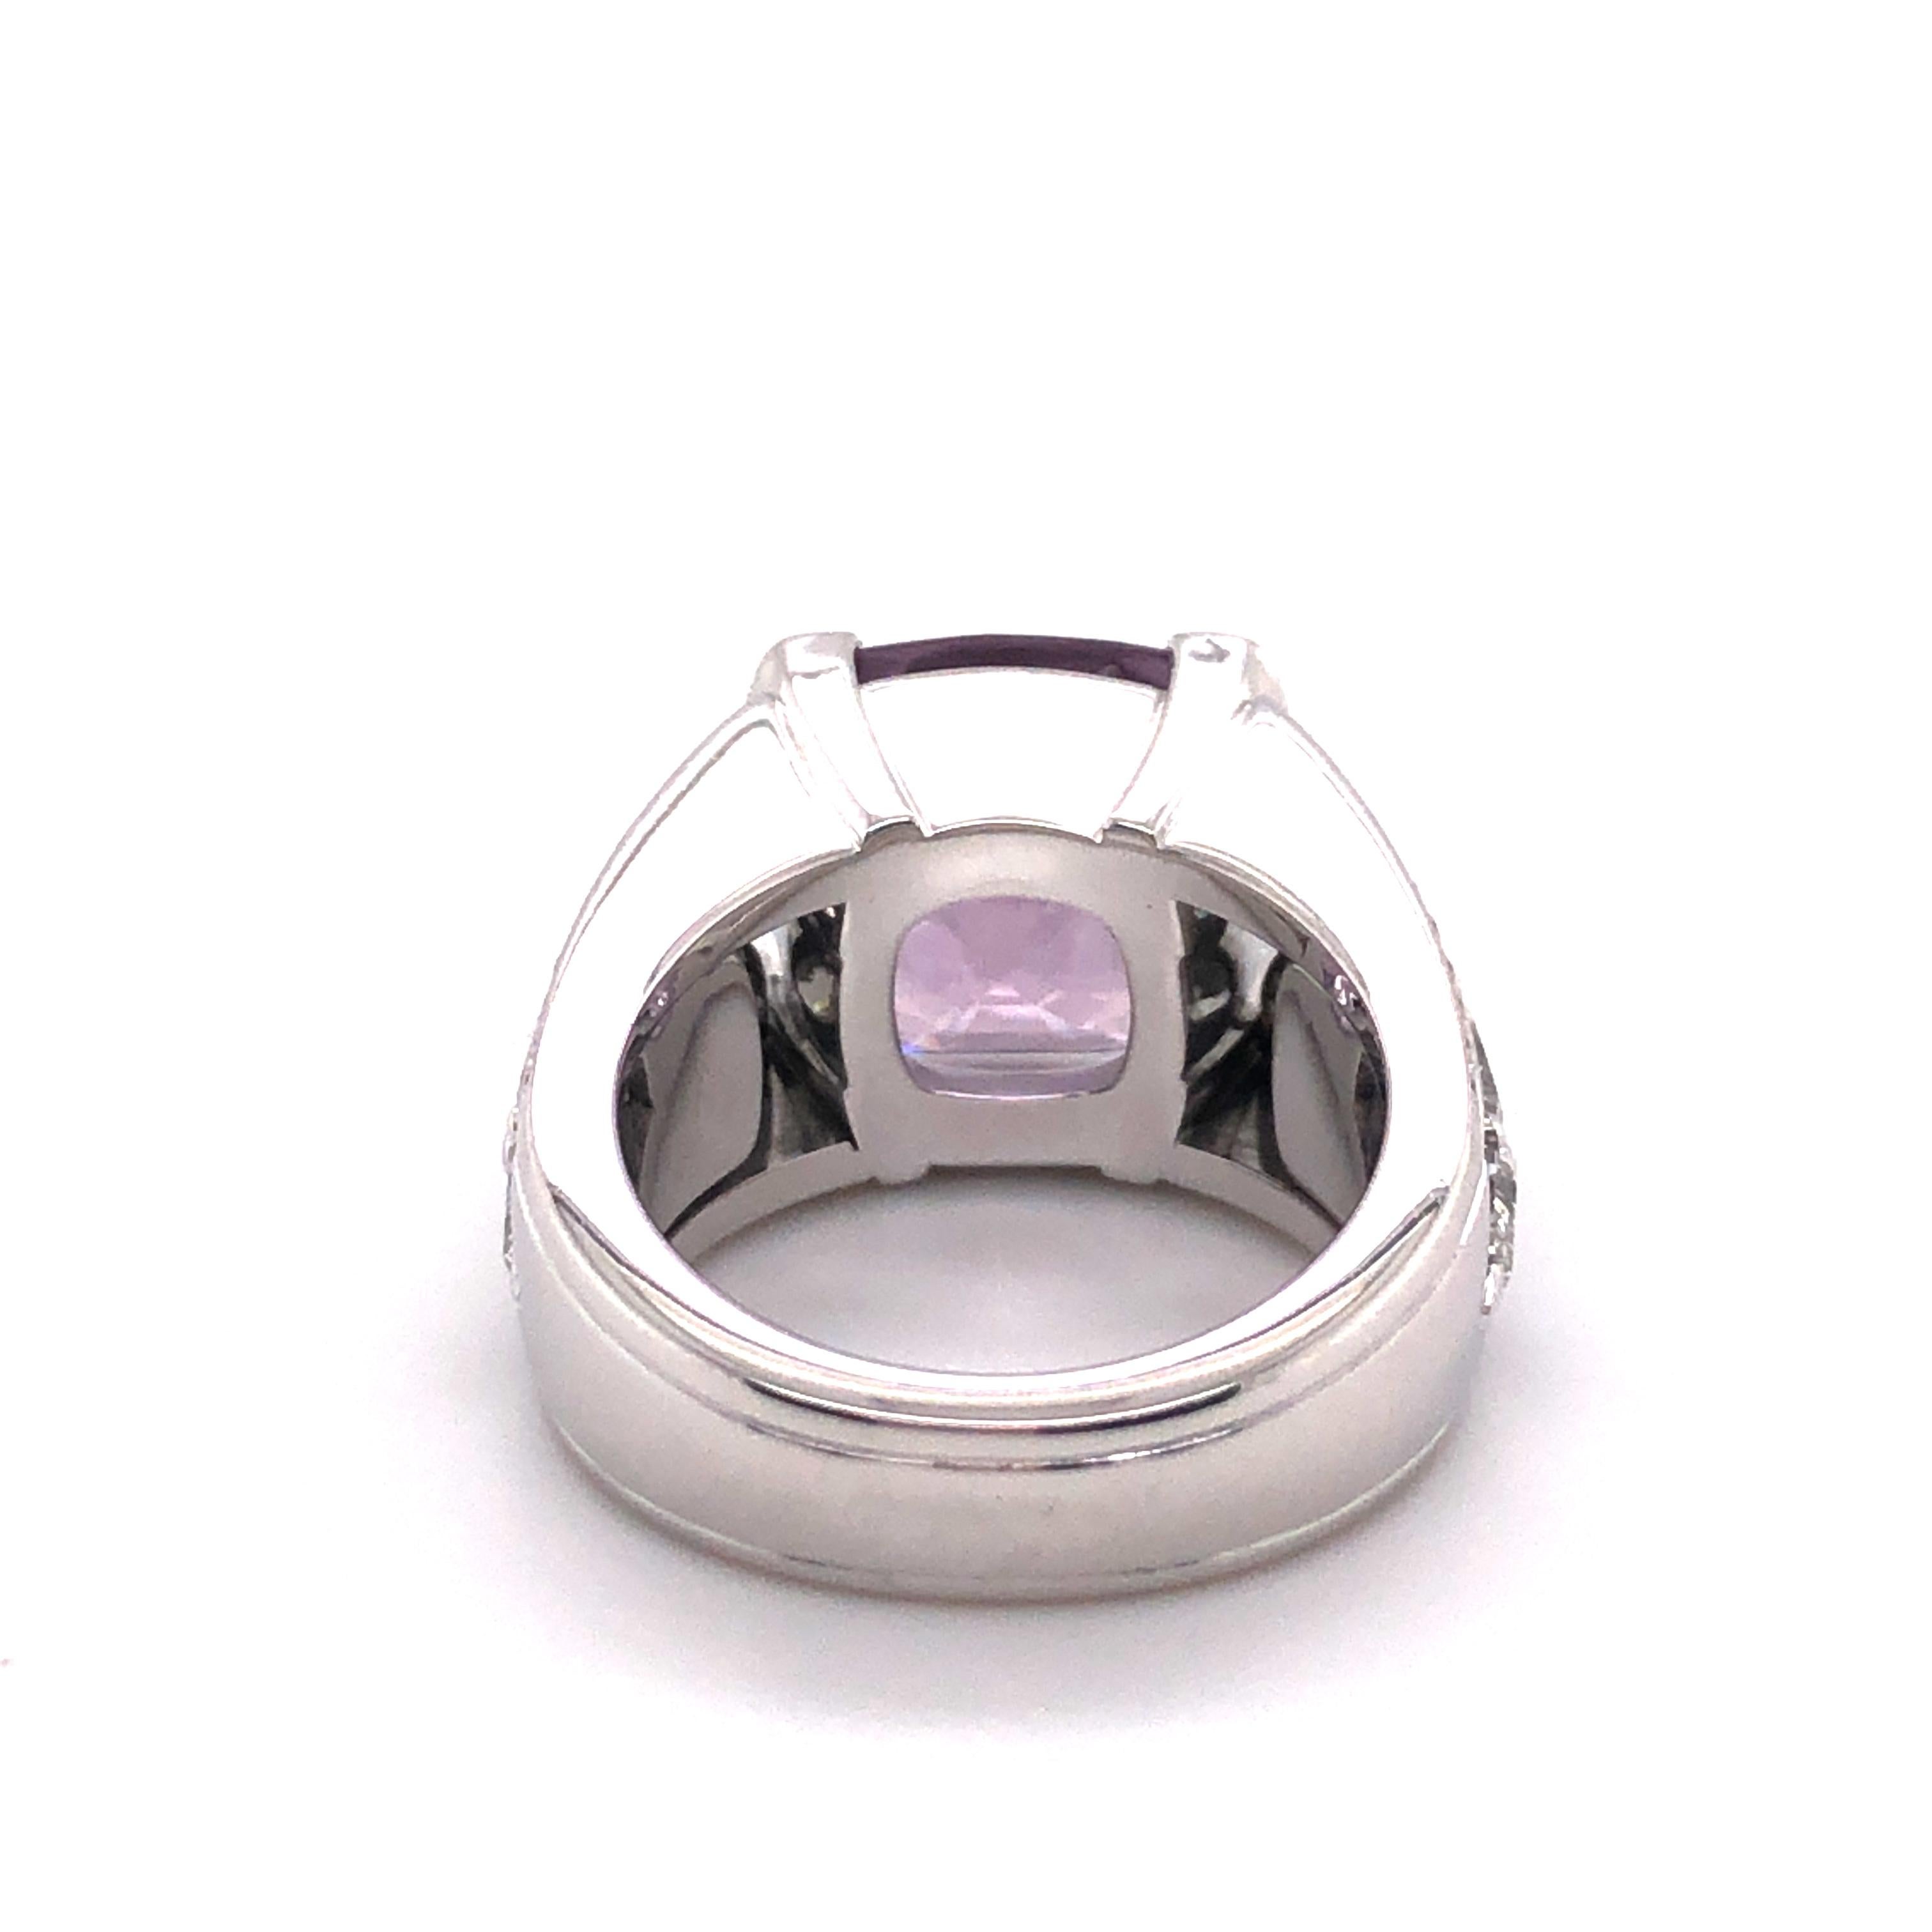 Certified 8.90 Ct Violet Burmese Spinel and Diamond Ring in 18 Karat White Gold For Sale 5